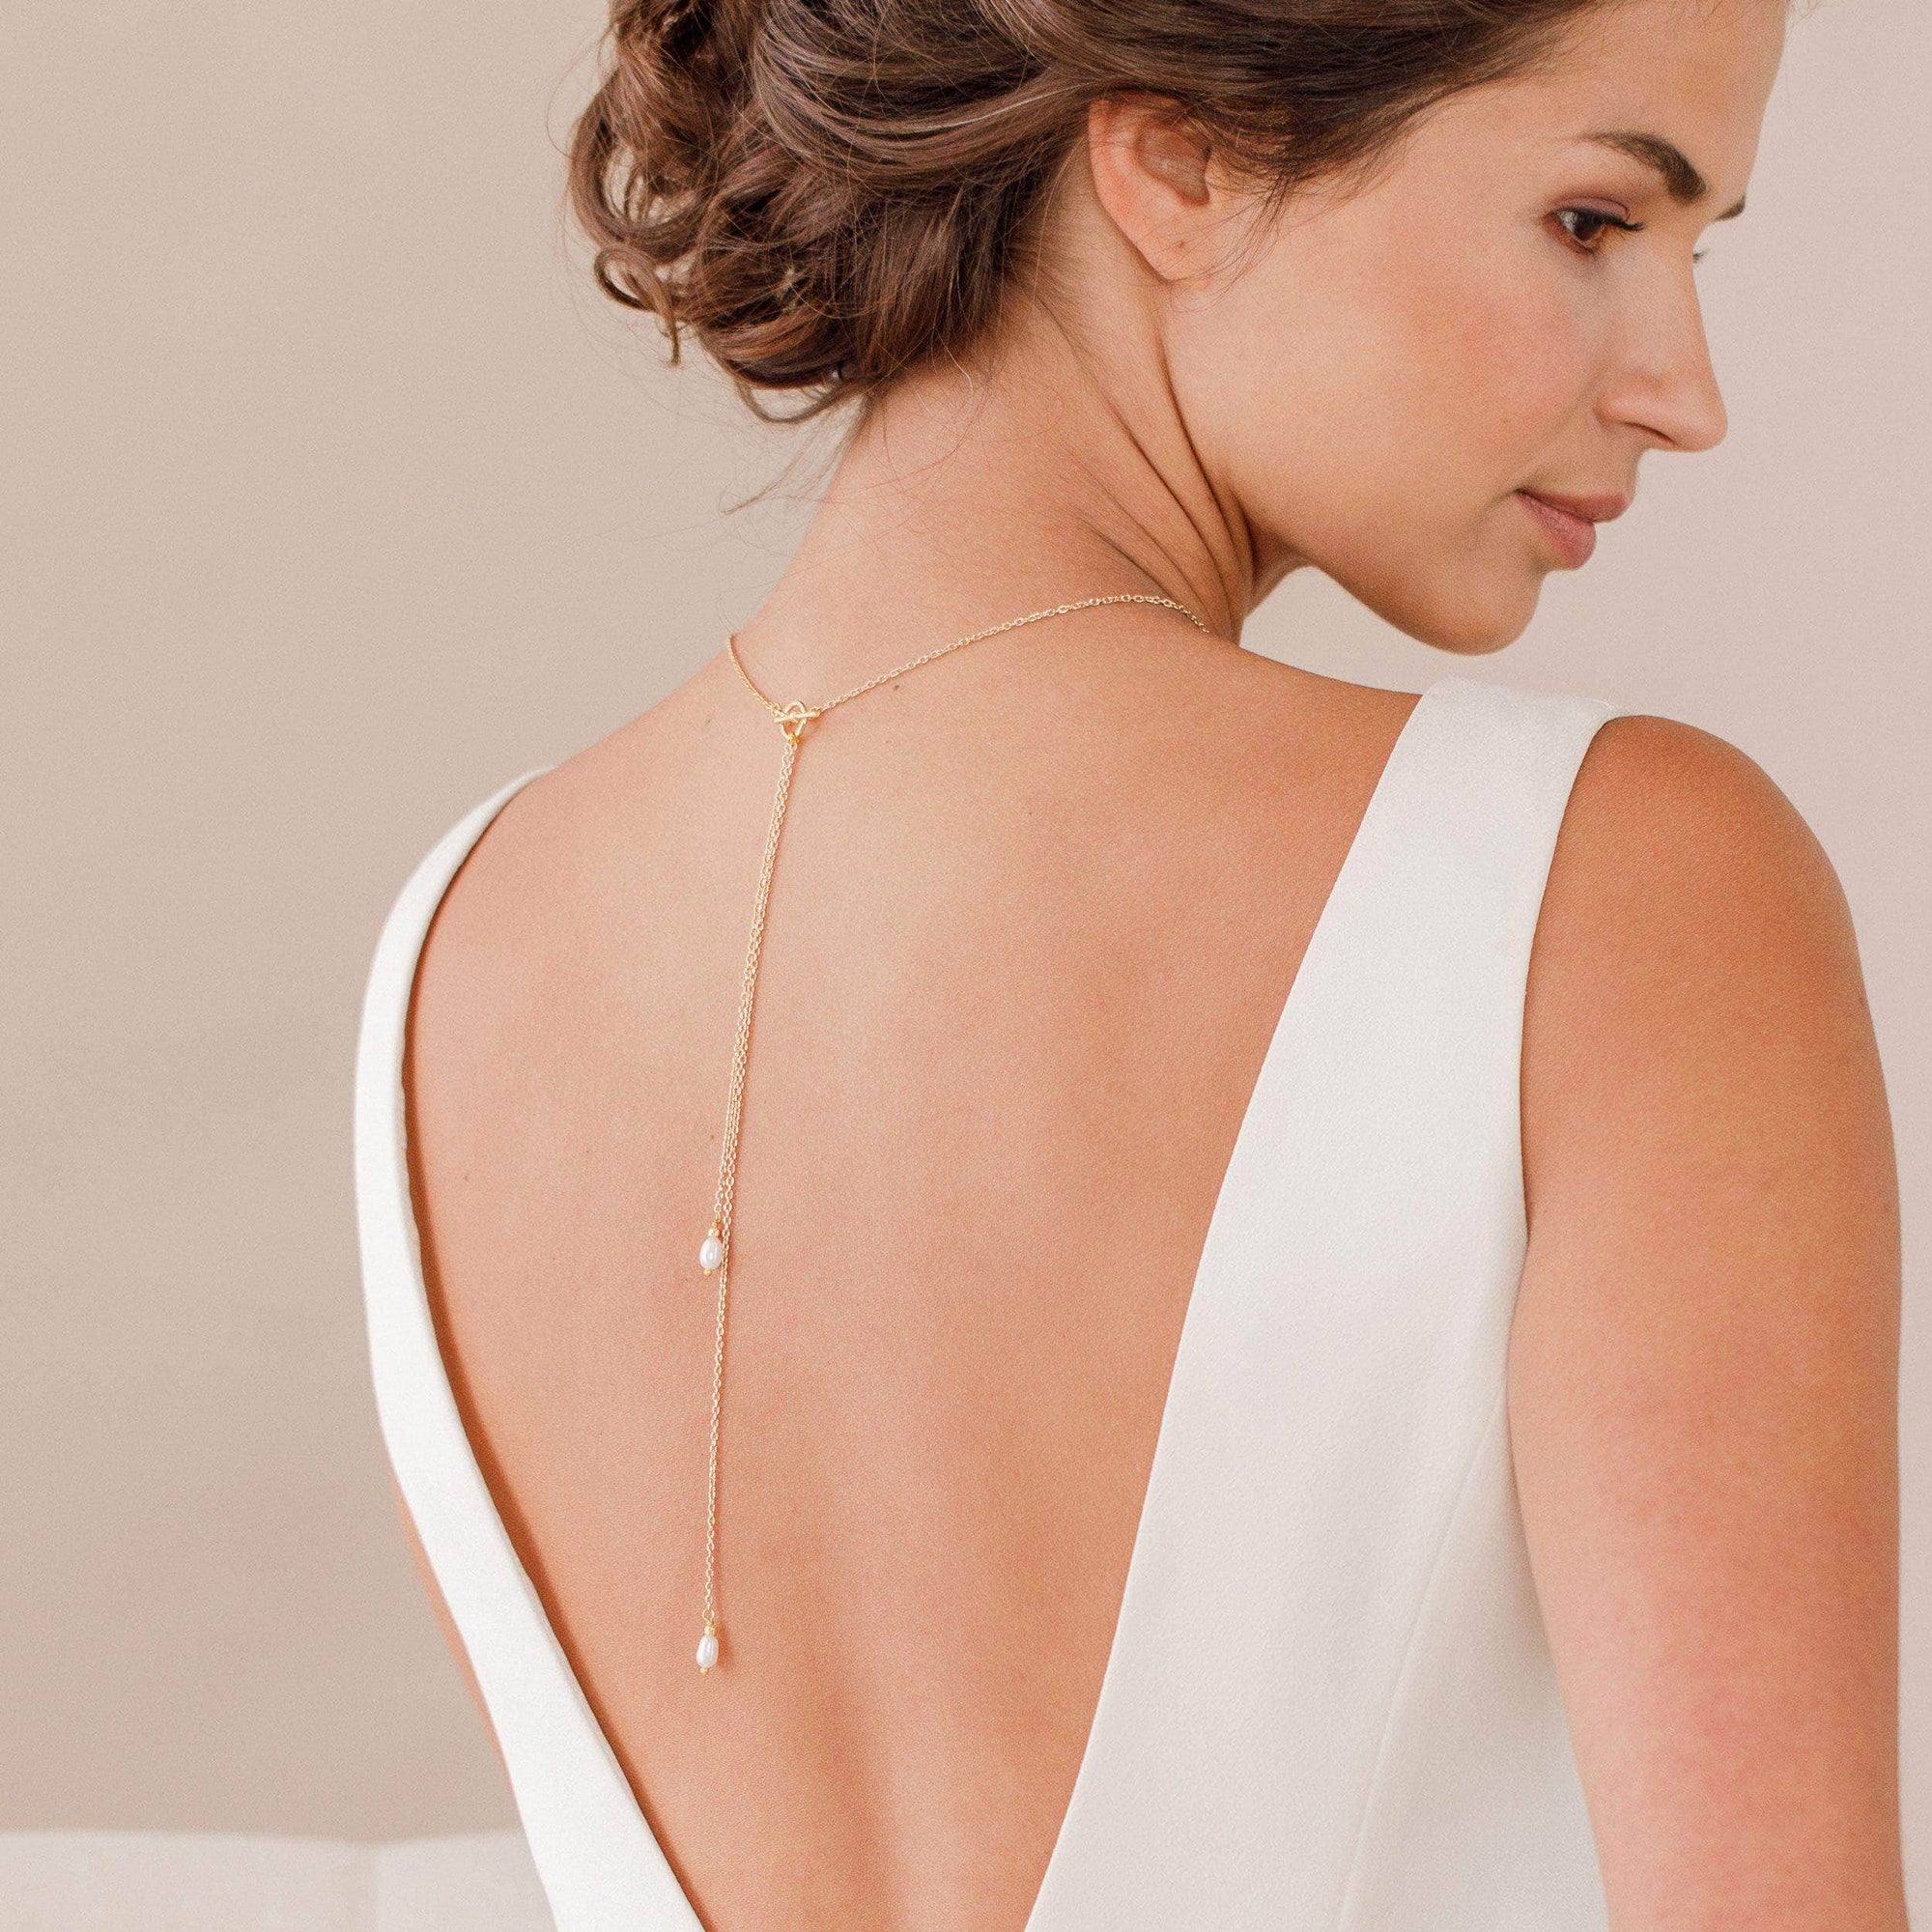 Wedding Necklace Pearl back drop necklace lariat for wedding - 'Charlotte'